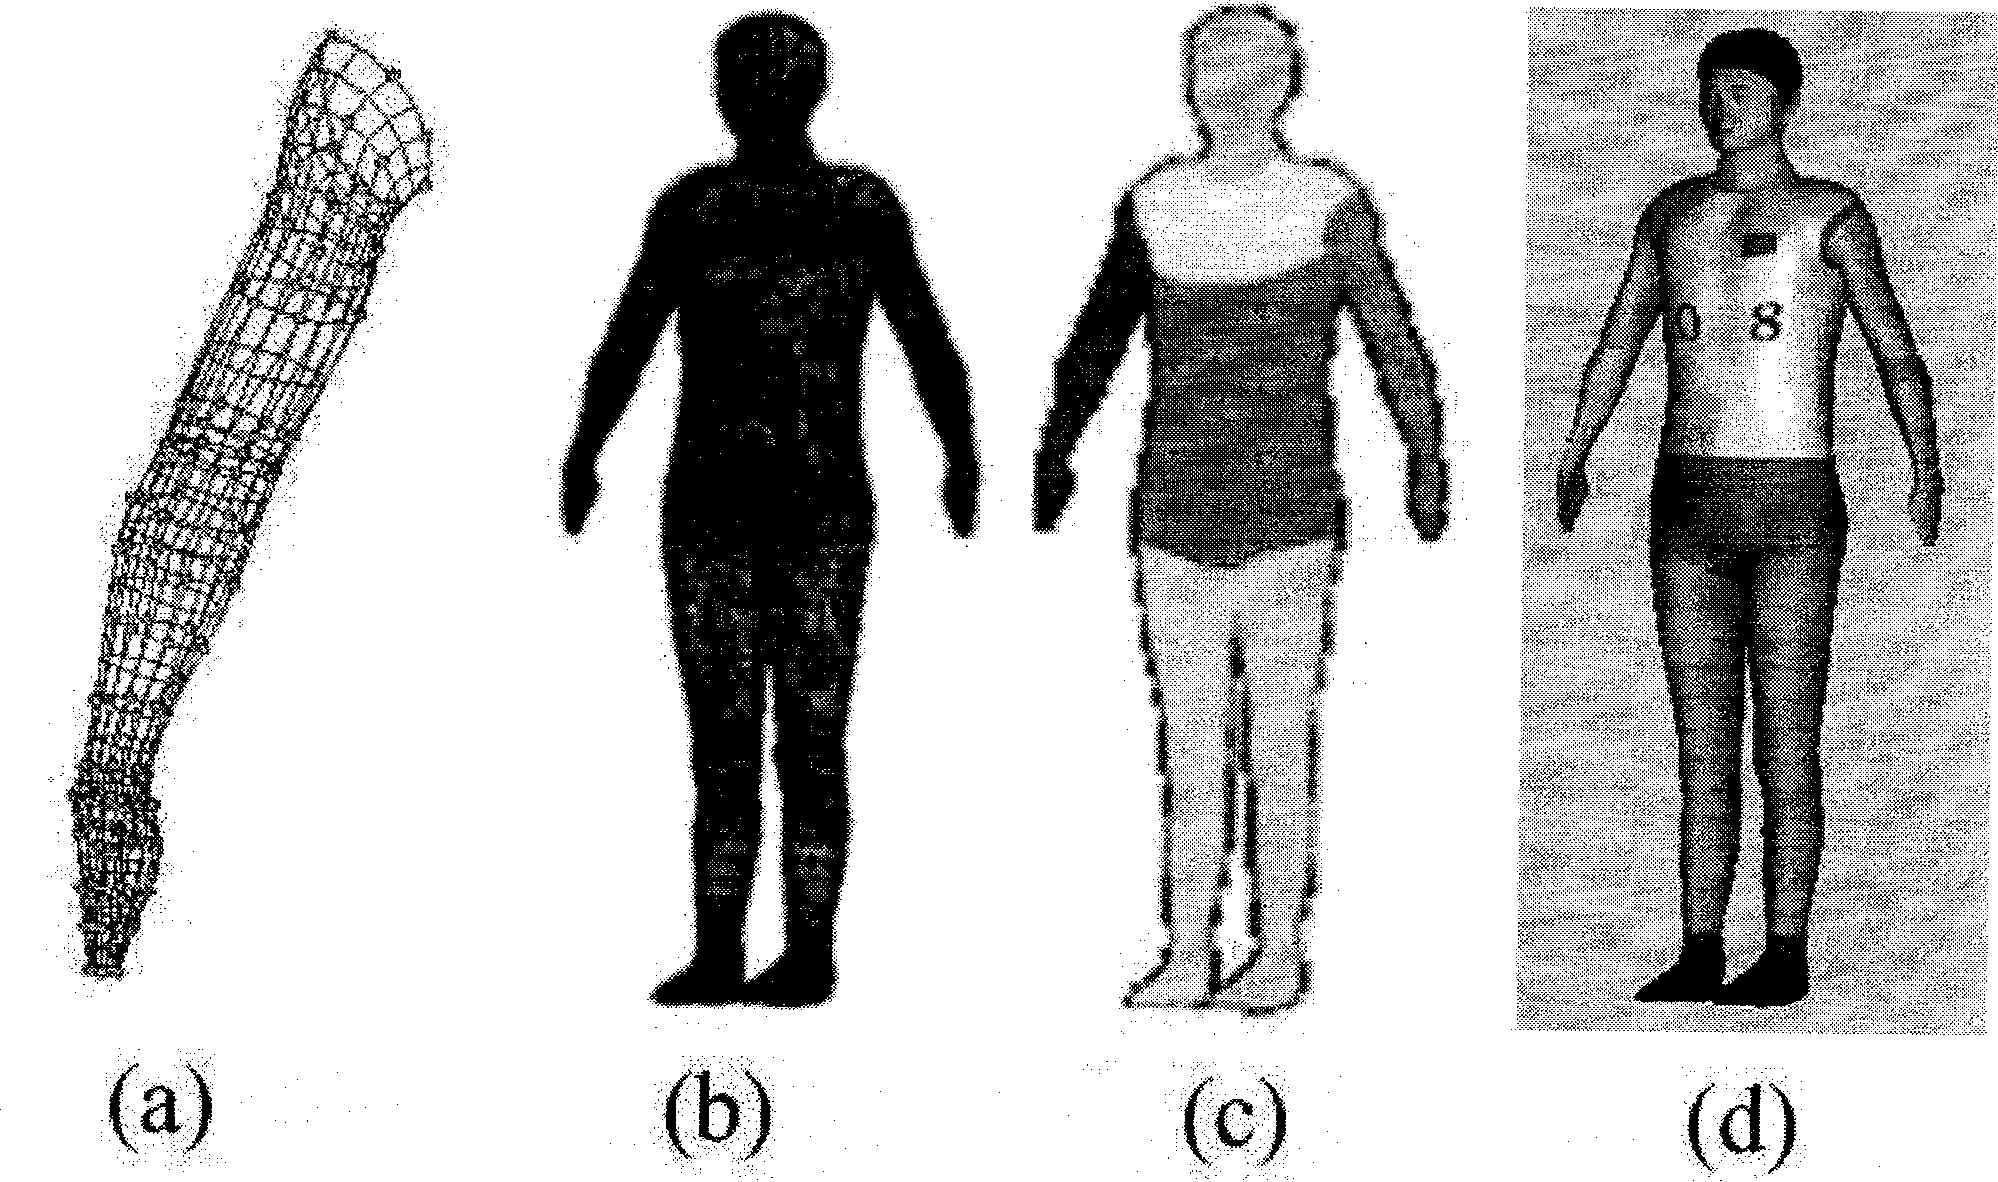 Human body animation process directly driven by movement capturing data based on semantic model